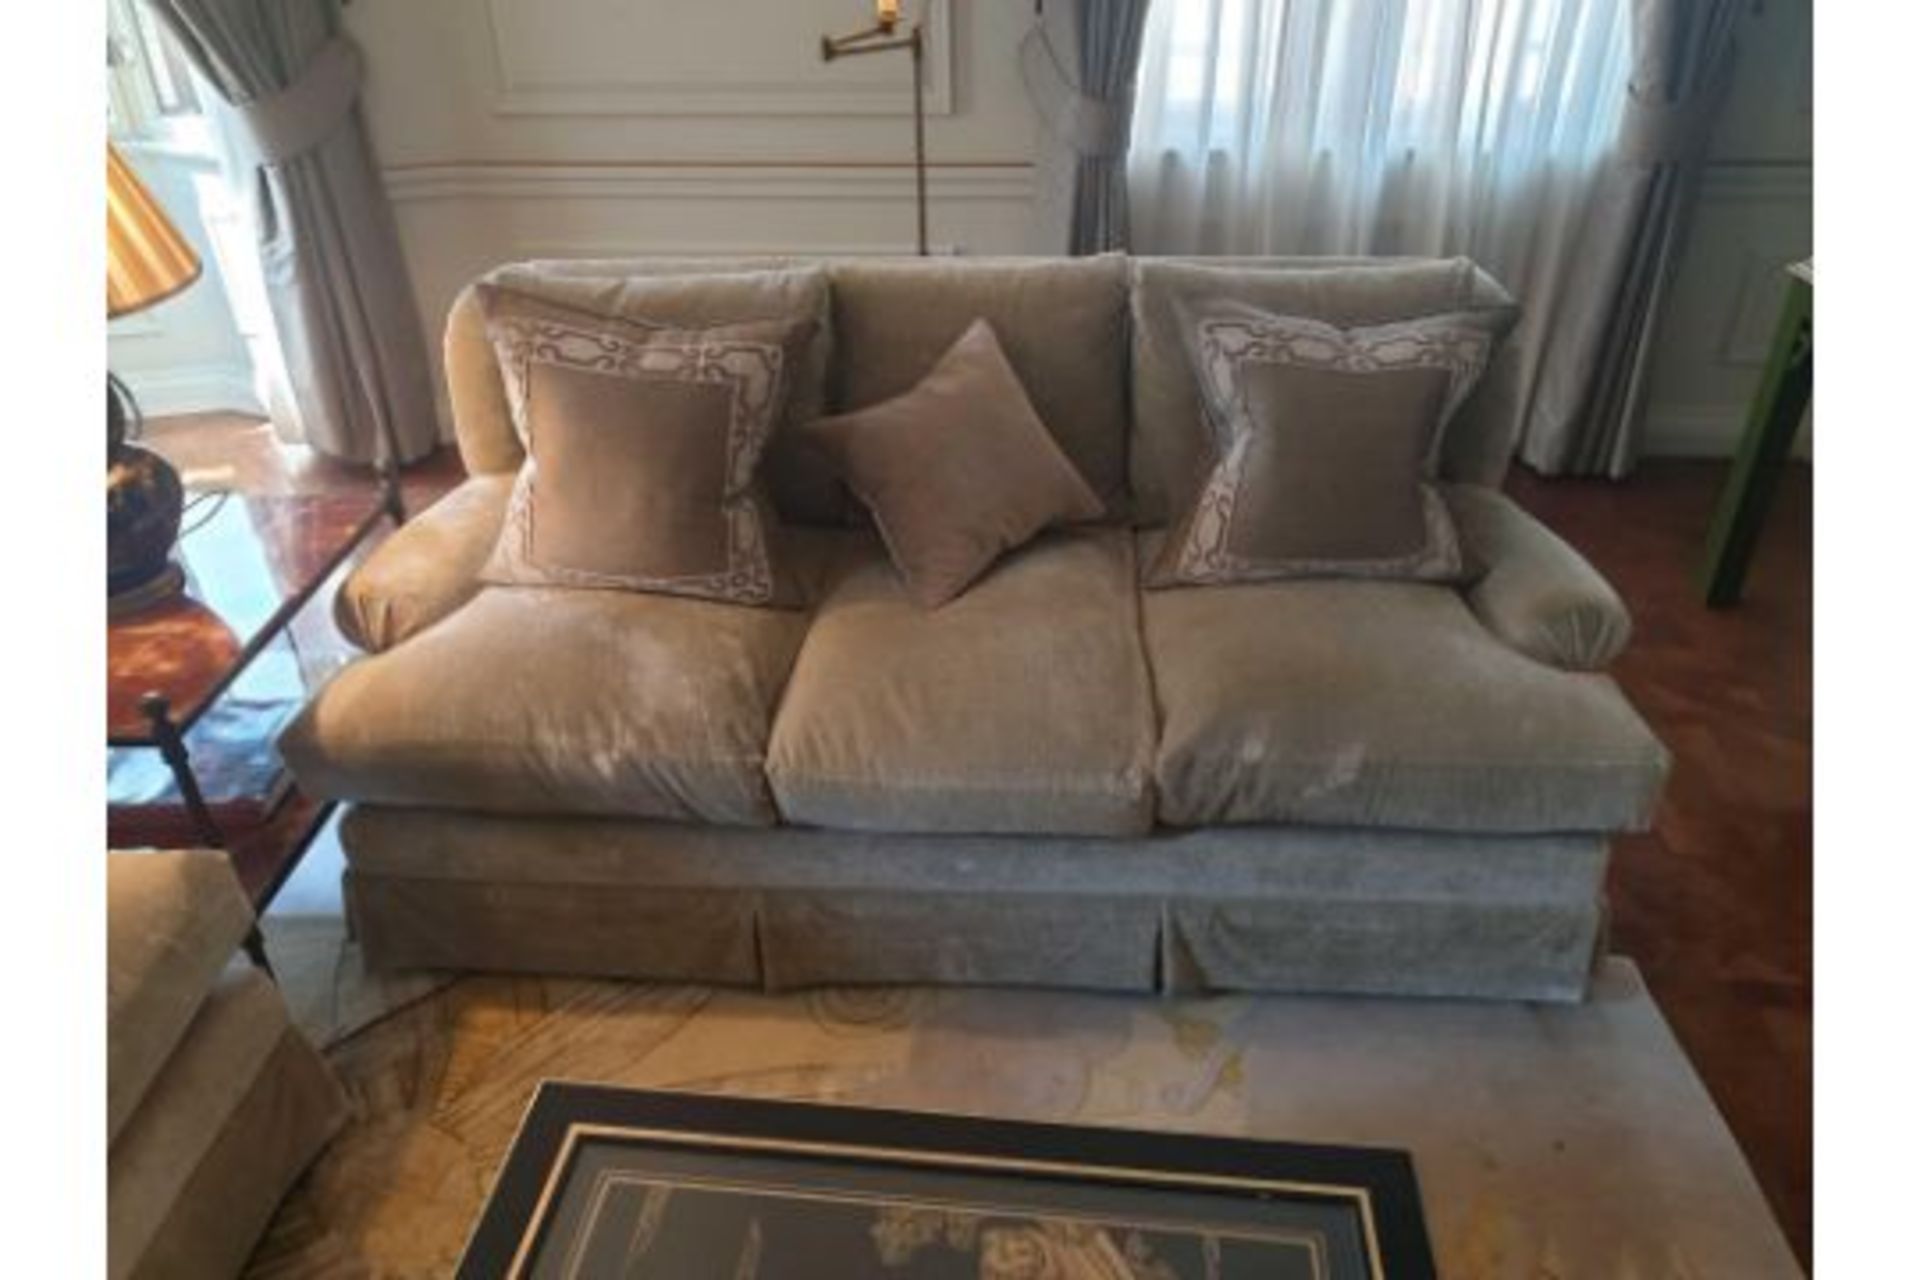 Classic Upholstered 3 Seater Sofa In Light Brown Fabric Complete With Scatter Cushions 180 x 92 x